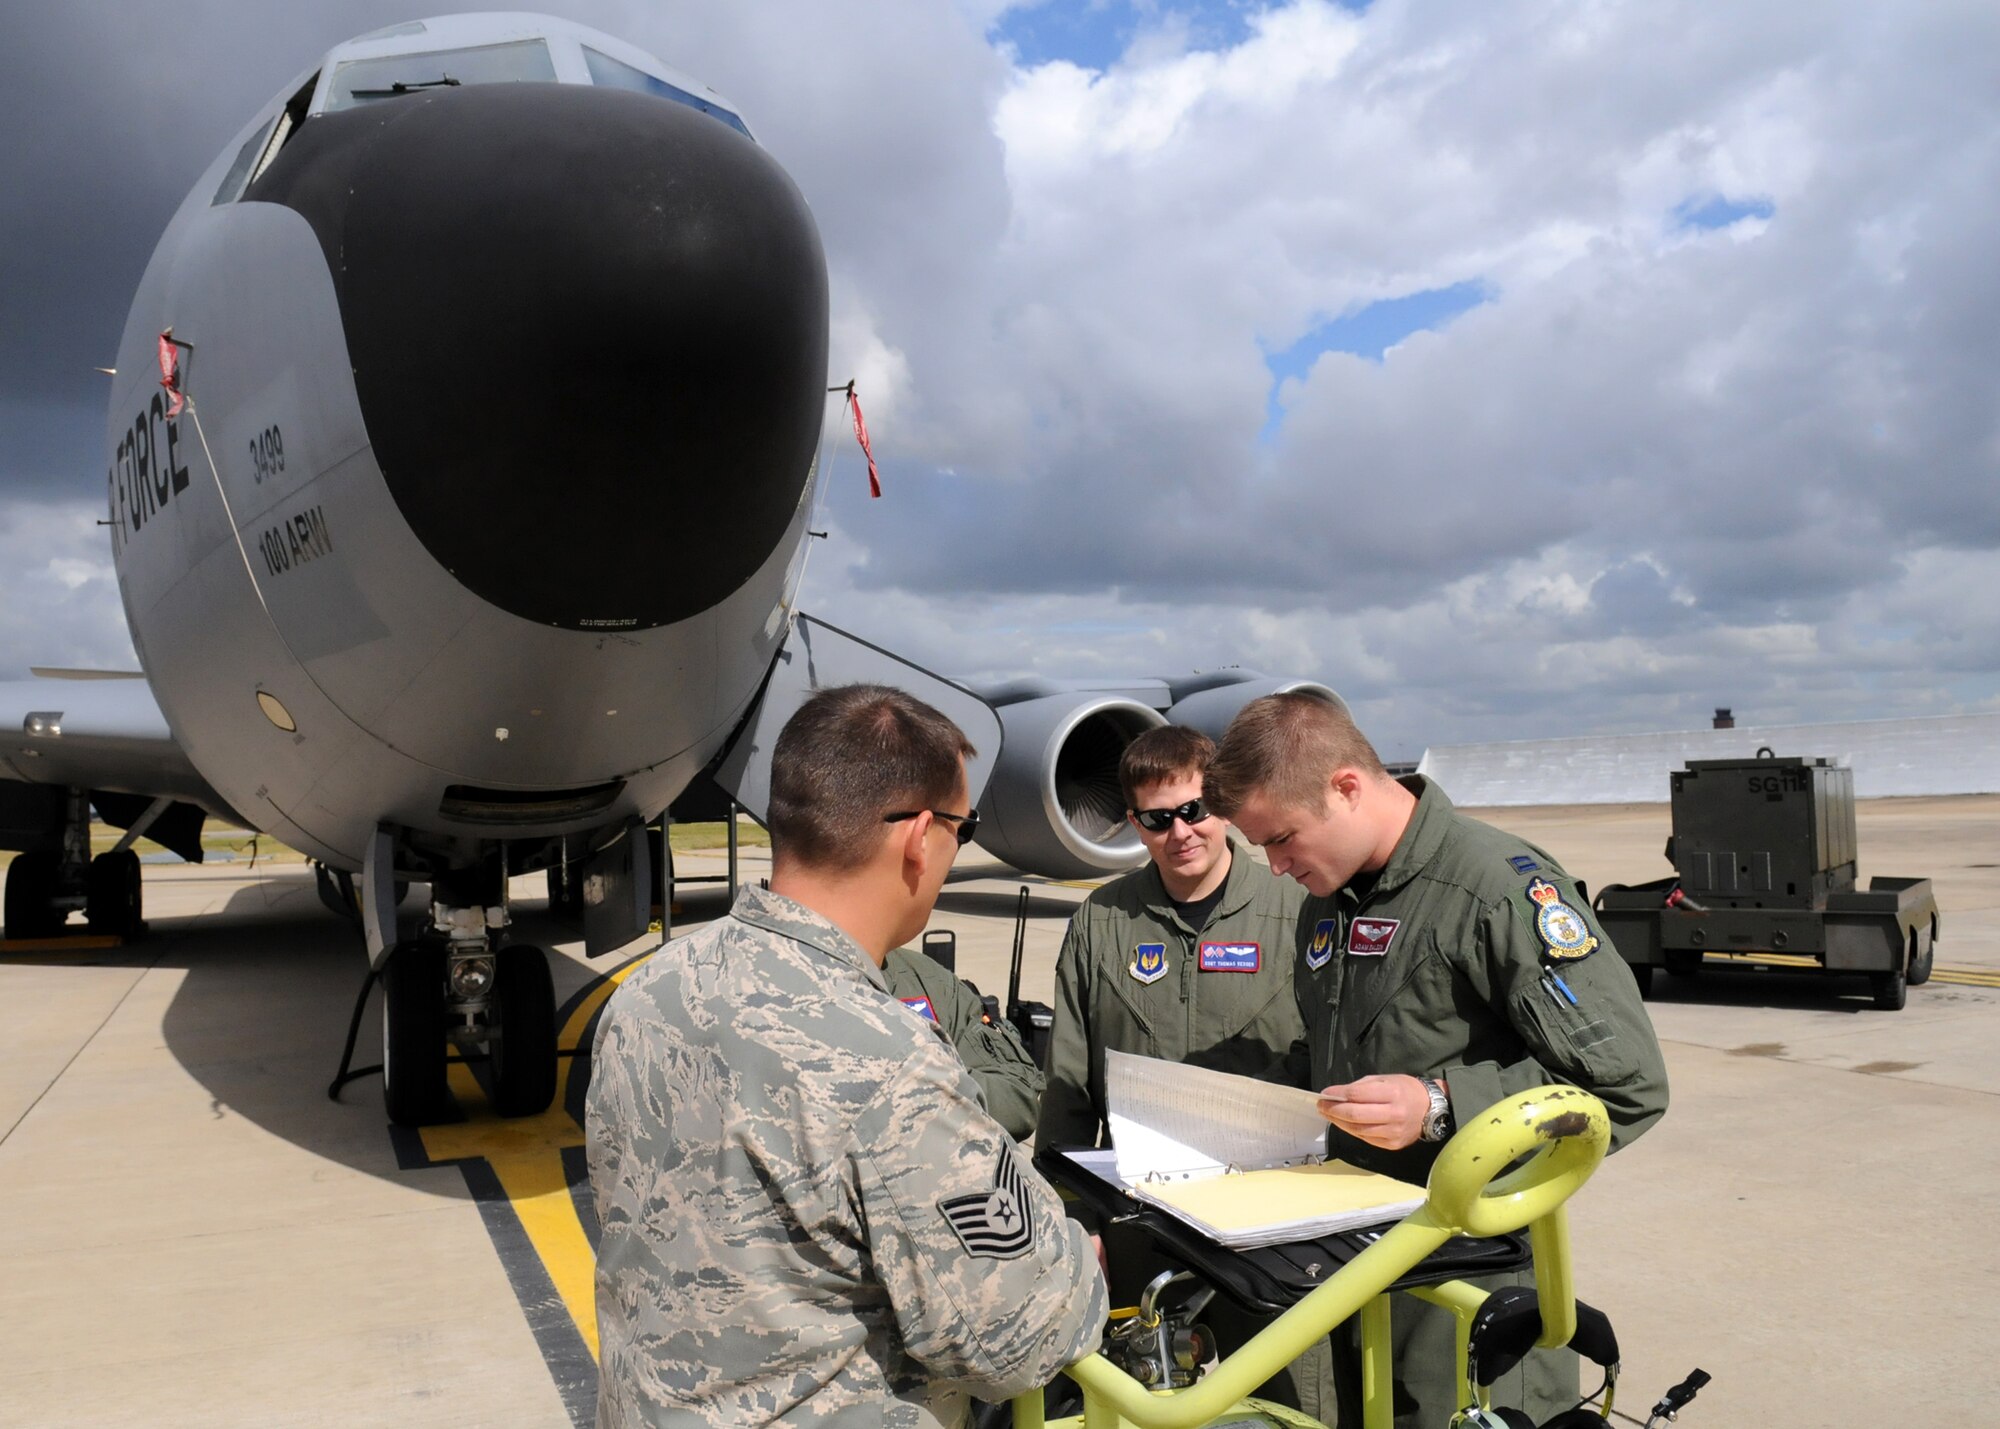 RAF MILDENHALL, England – A KC-135 aircrew checks aircraft forms prior to their walkaround during an annual Allied Strike exercise Aug. 5. Allied Strike is Europe’s premier annual close air support exercise that helps build partnership capacity among allied NATO nations and joint services. (U.S. Air Force photo/ Staff Sgt. Jerry Fleshman)